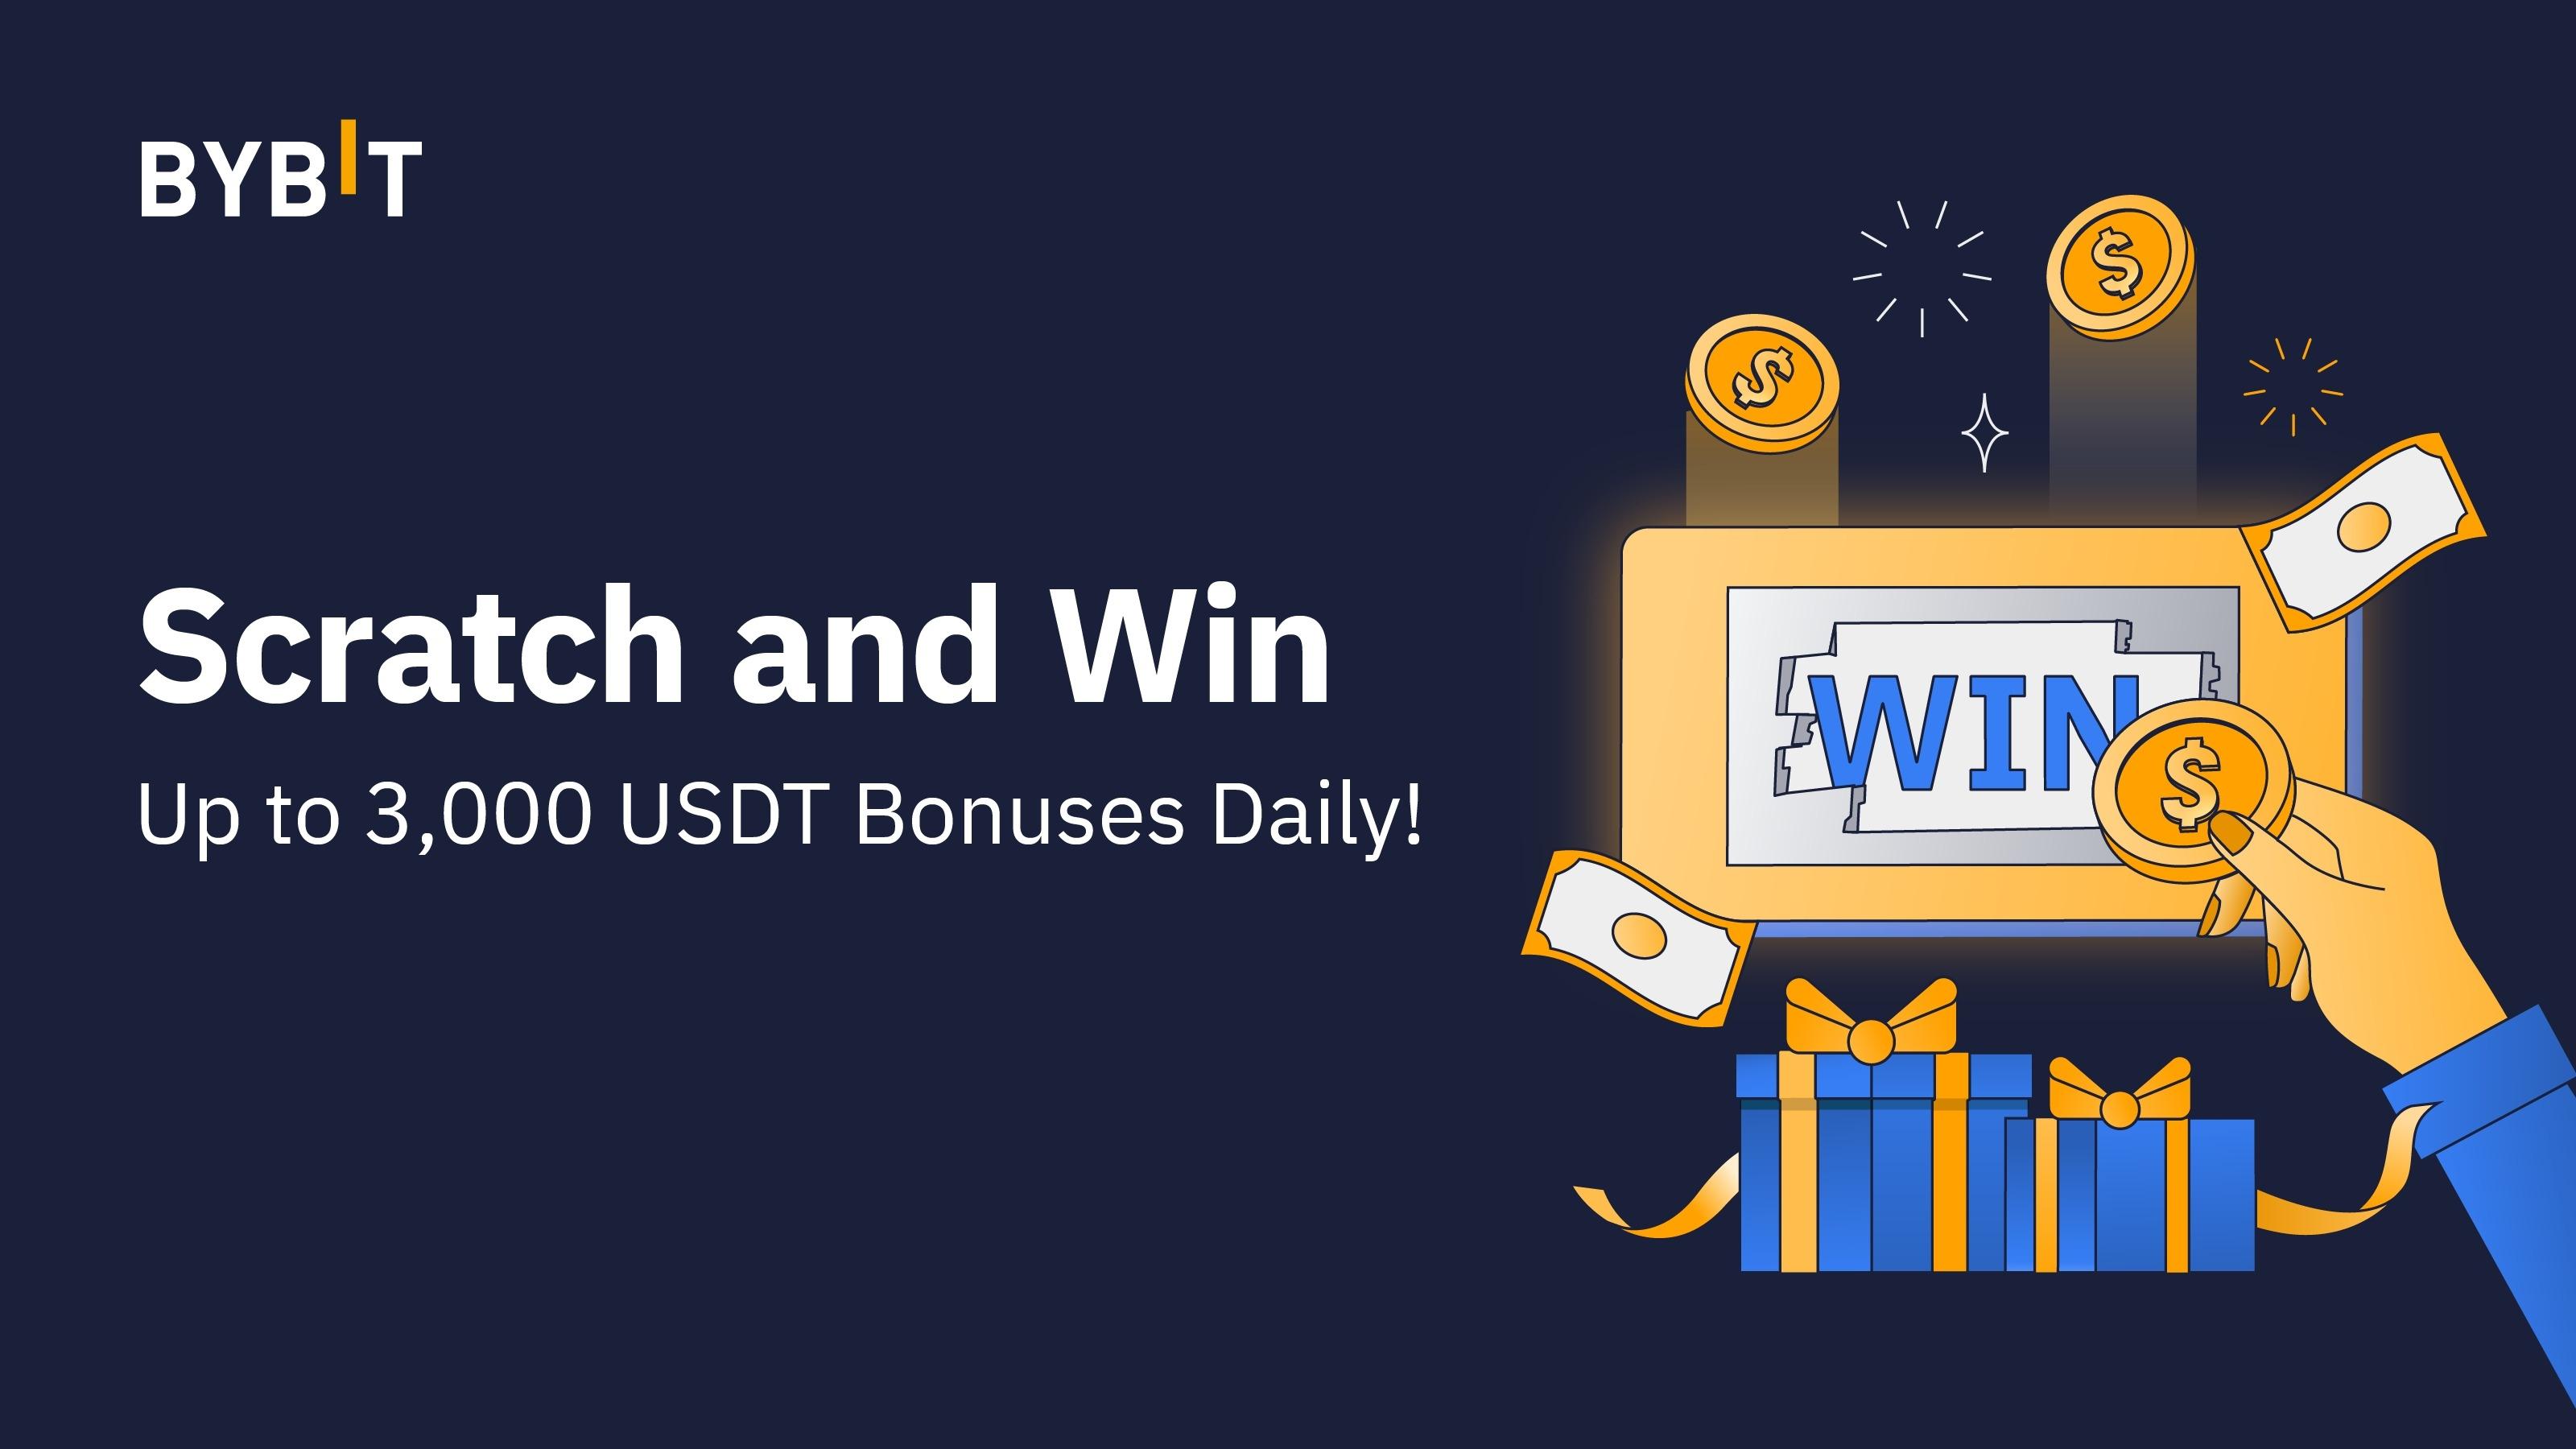 Scratch and Win: Up to 3,000 USDT in Bonuses Everyday